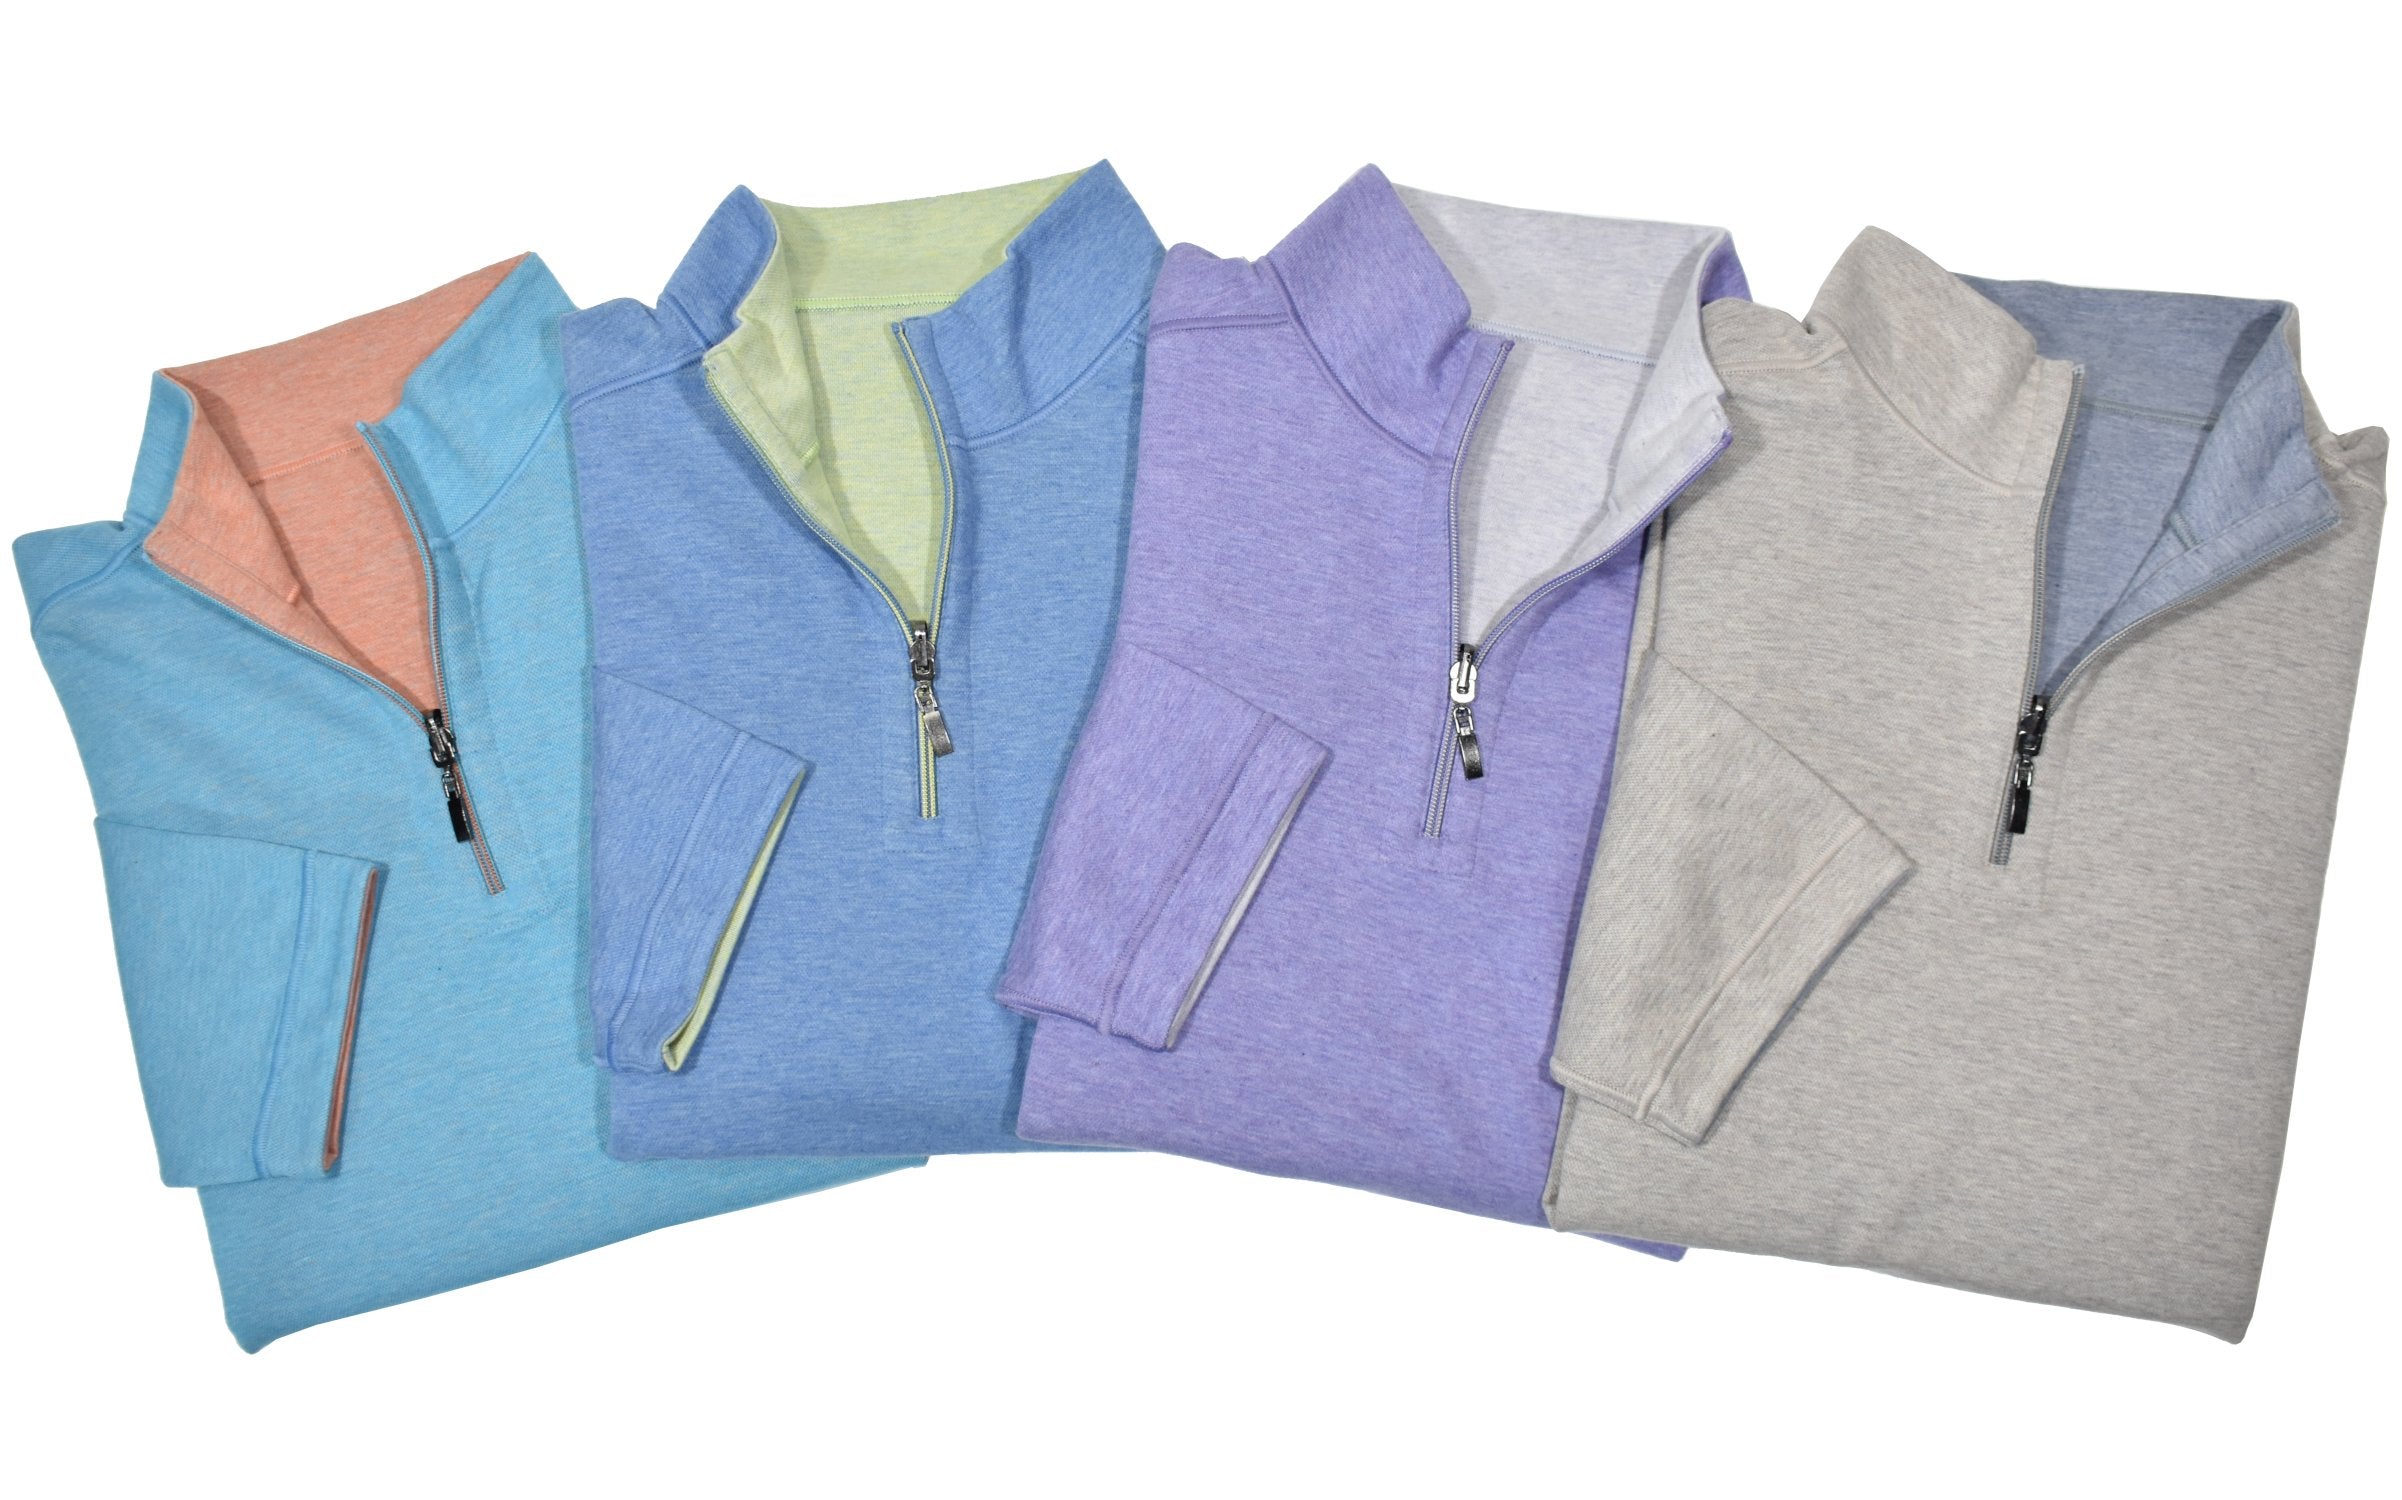 Reversible 1/4 zip is for both comfort and style. Soft and elegant polynosic performance fabric provides a comfortable fit while the classic 1/4 zip model and open sleeves offer a timeless look. The welted seams on both sides adds style.